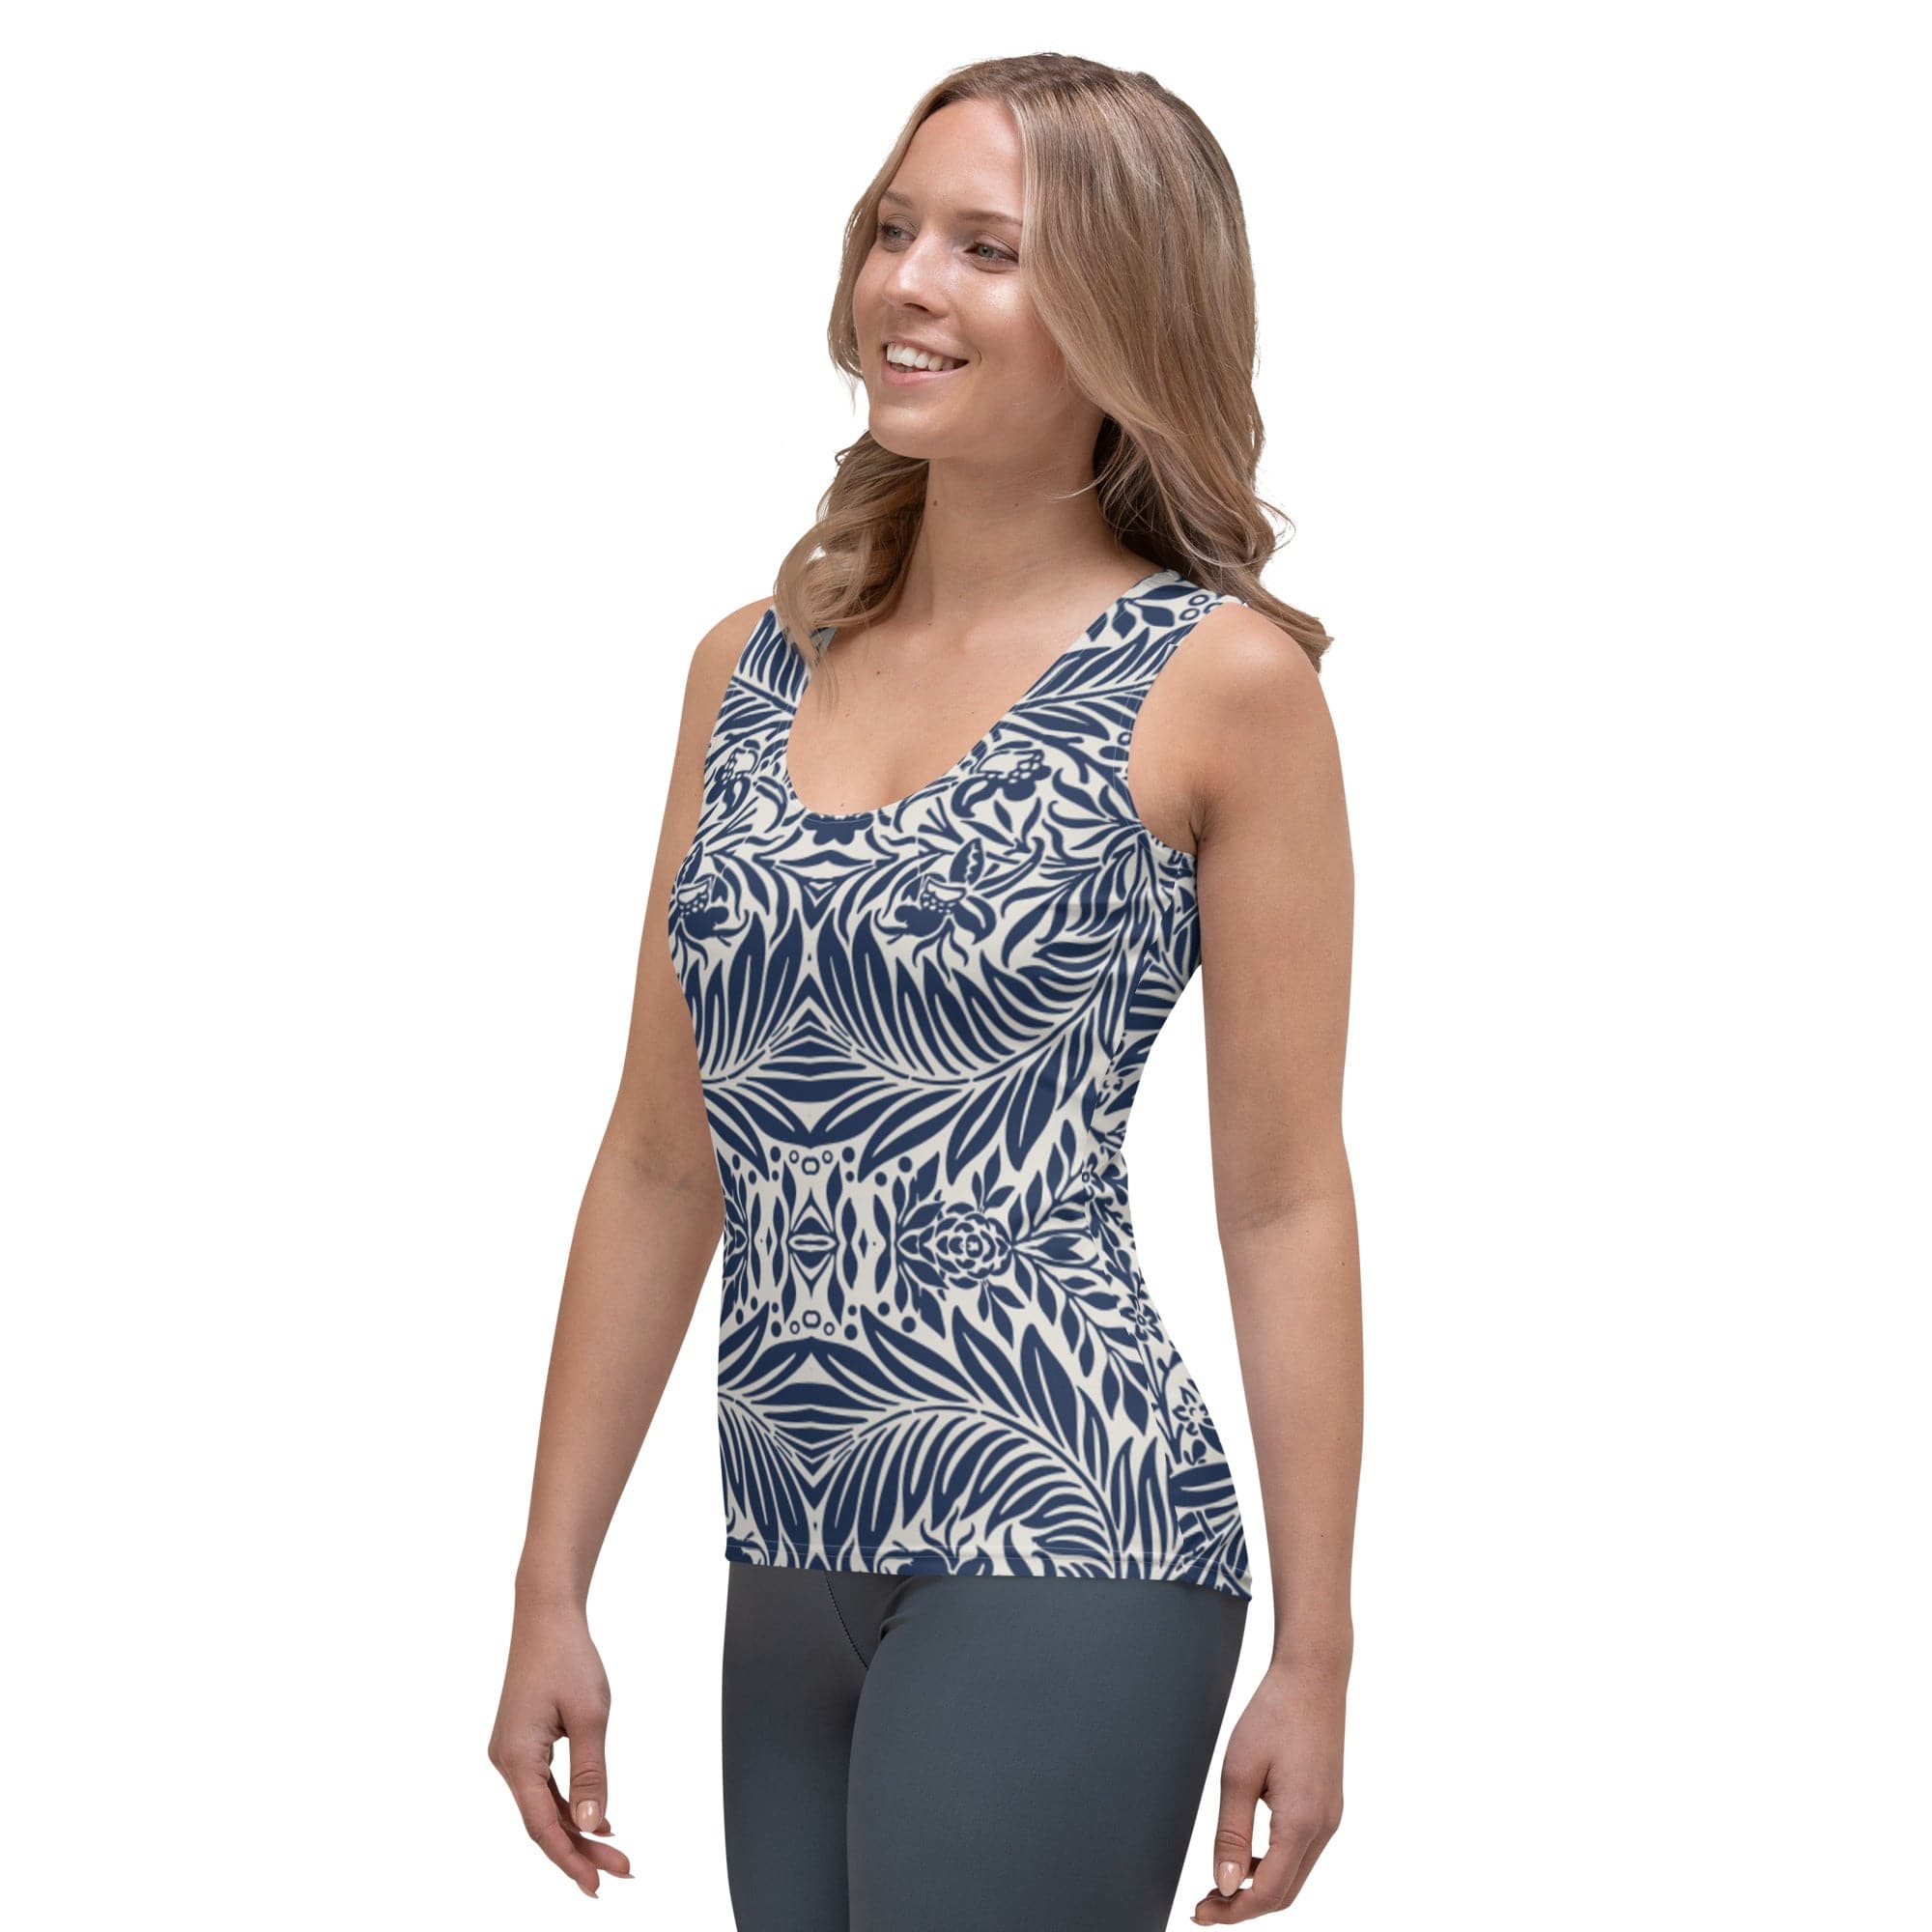 Blue and White Floral composition, Womens Sublimation Cut & Sew Tank Top, by Sensus Stduio Design